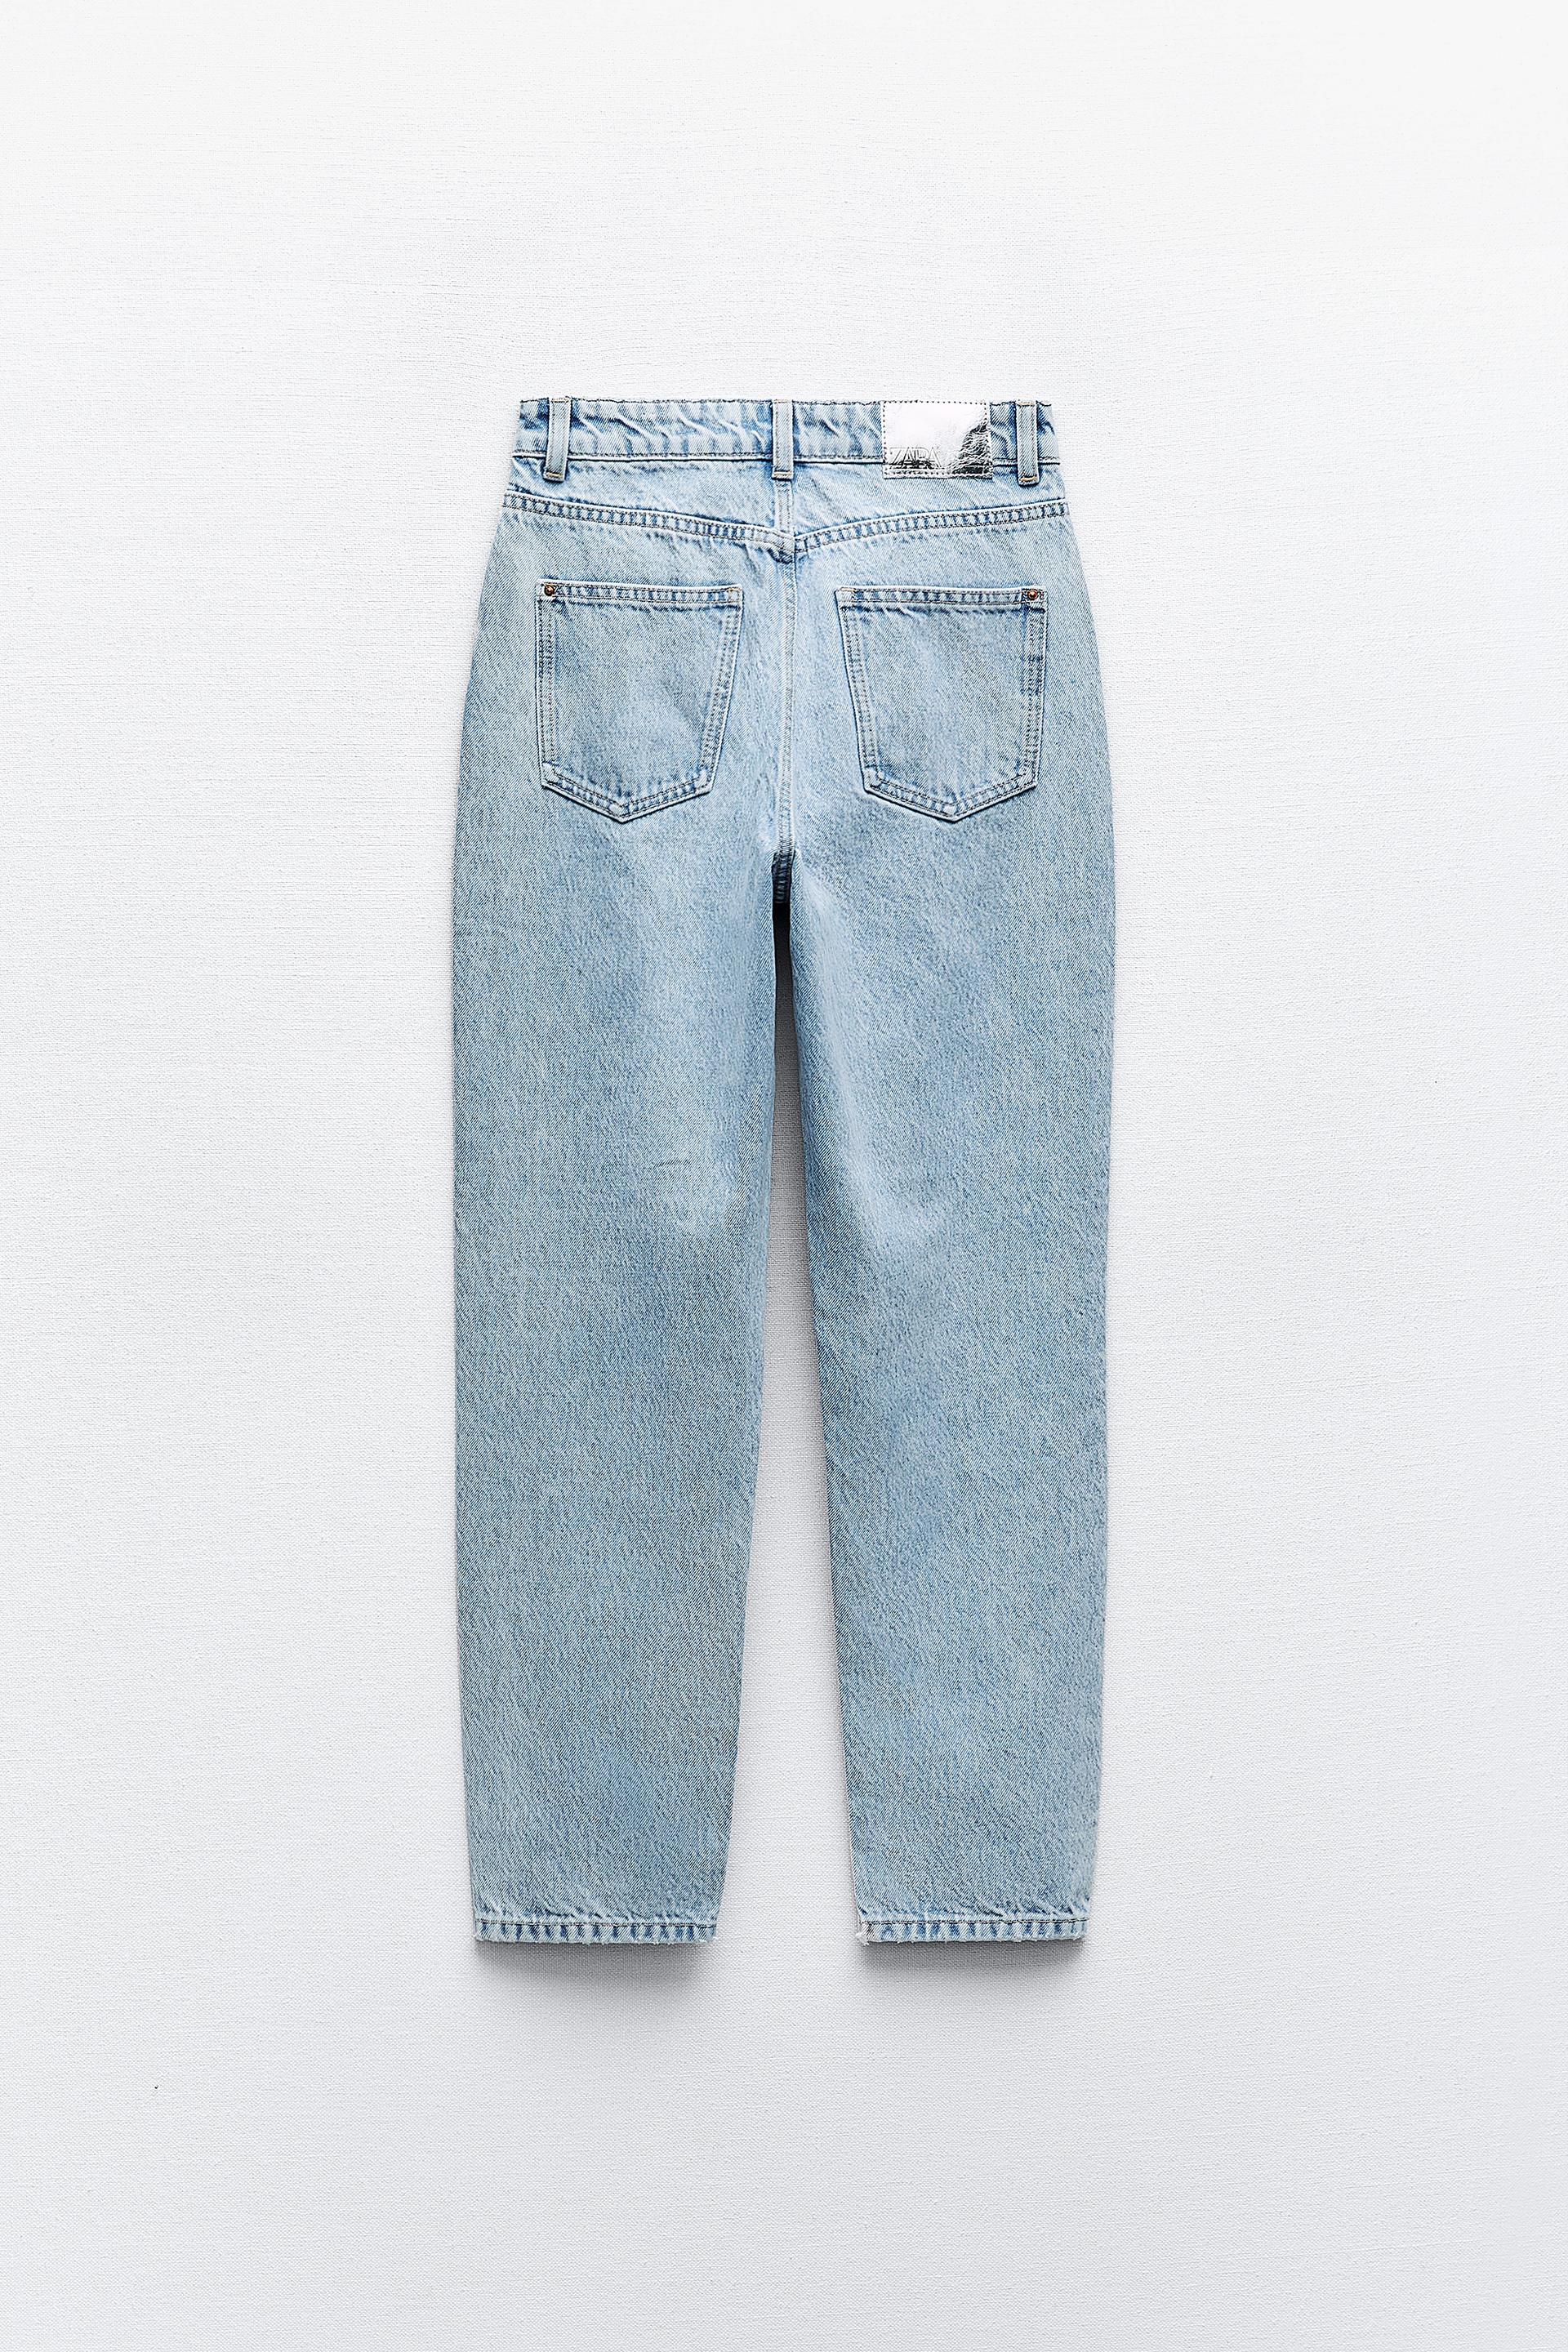 ZARA HIGH RISE ANKLE LENGHT MOM JEANS – ZAGAL